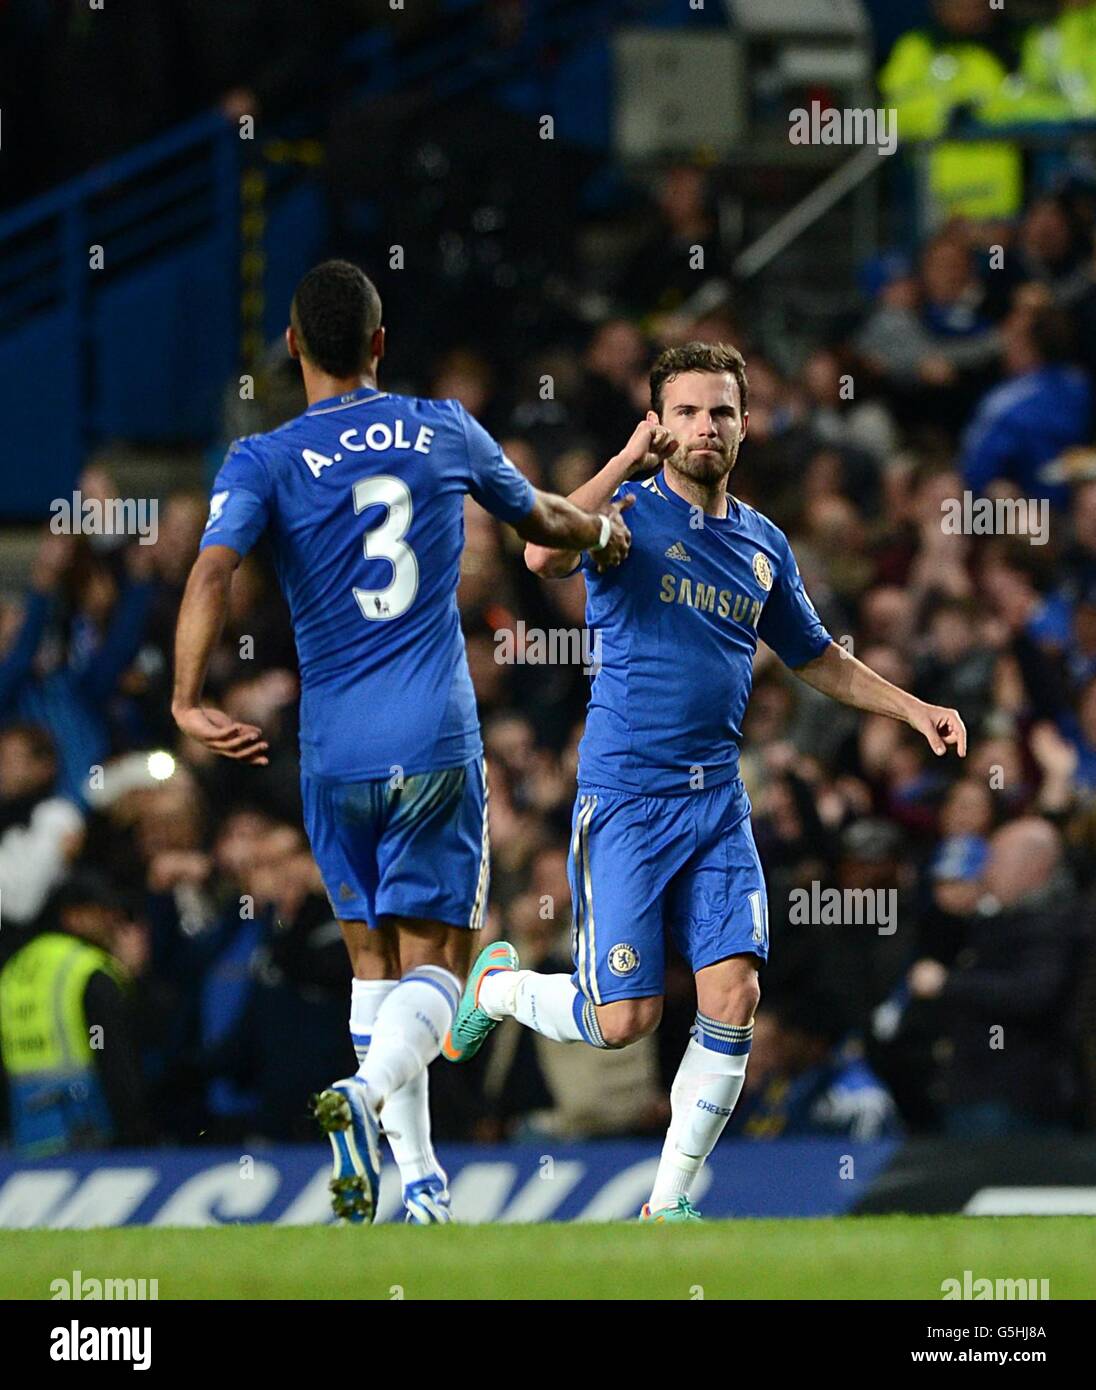 Chelsea's Juan Mata celebrates scoring his side's first goal of the game from a free kick with teammate Ashley Cole (left) Stock Photo